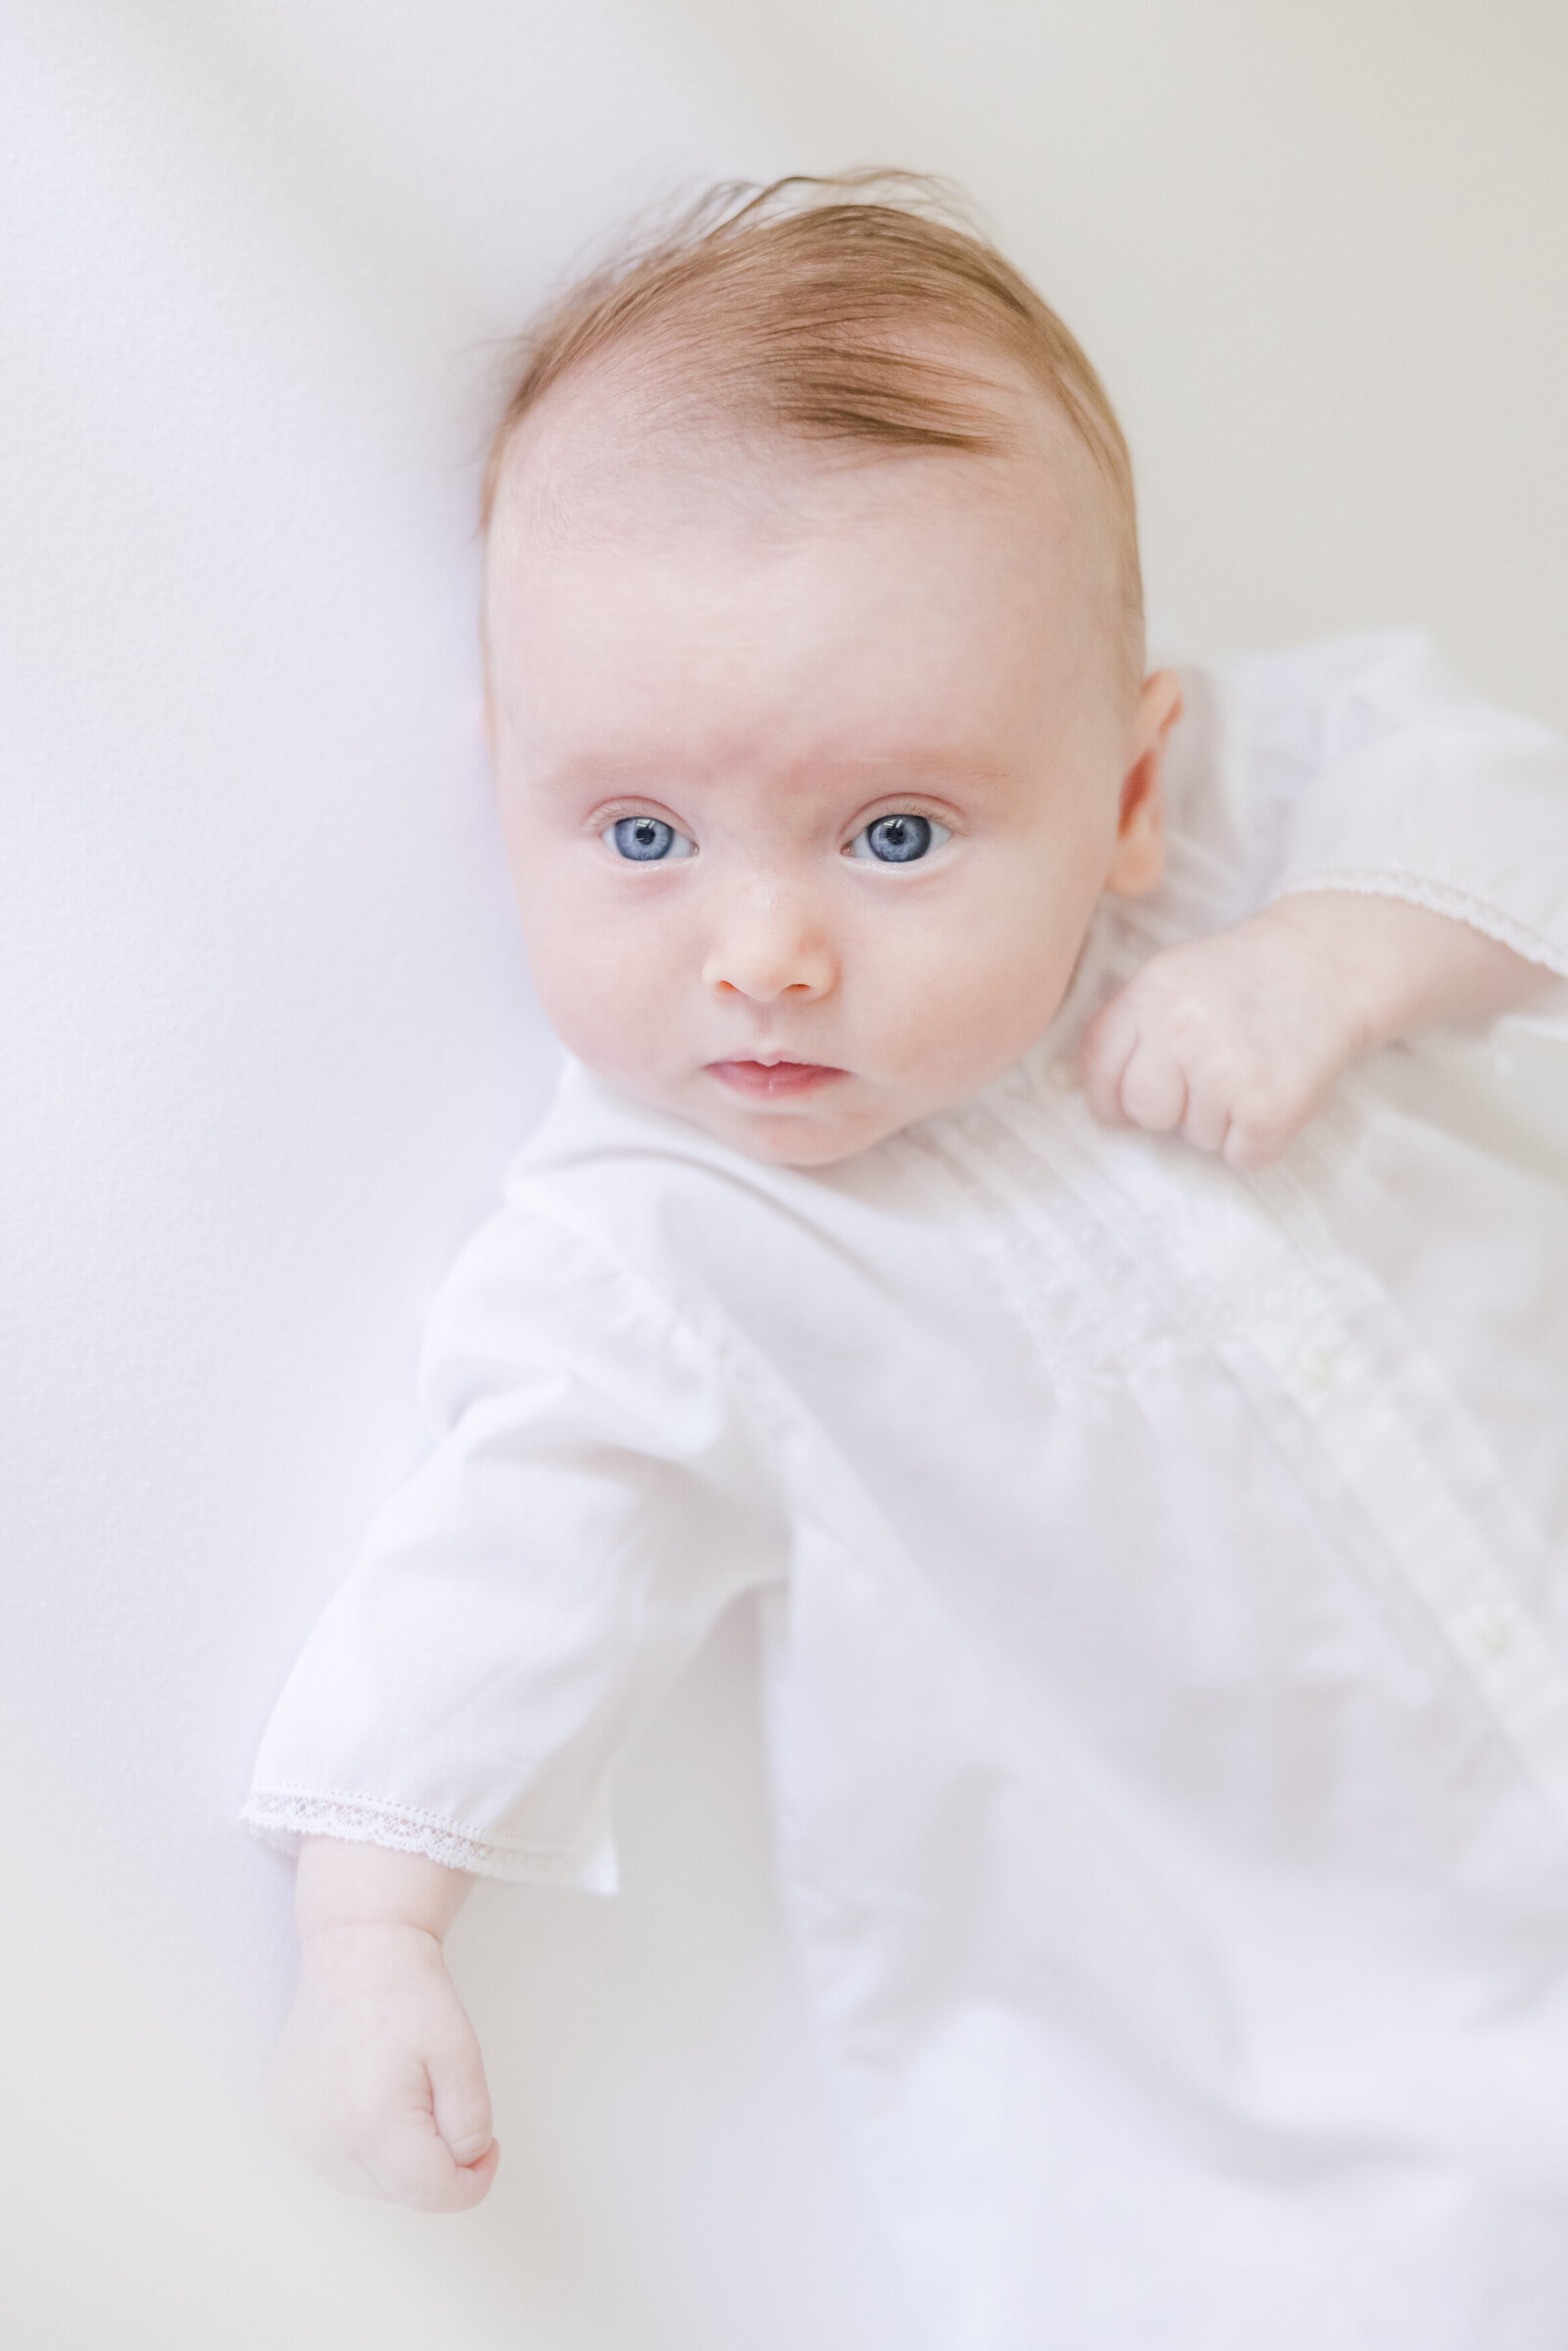 Blue eyed baby in white gown gazing at the camera.